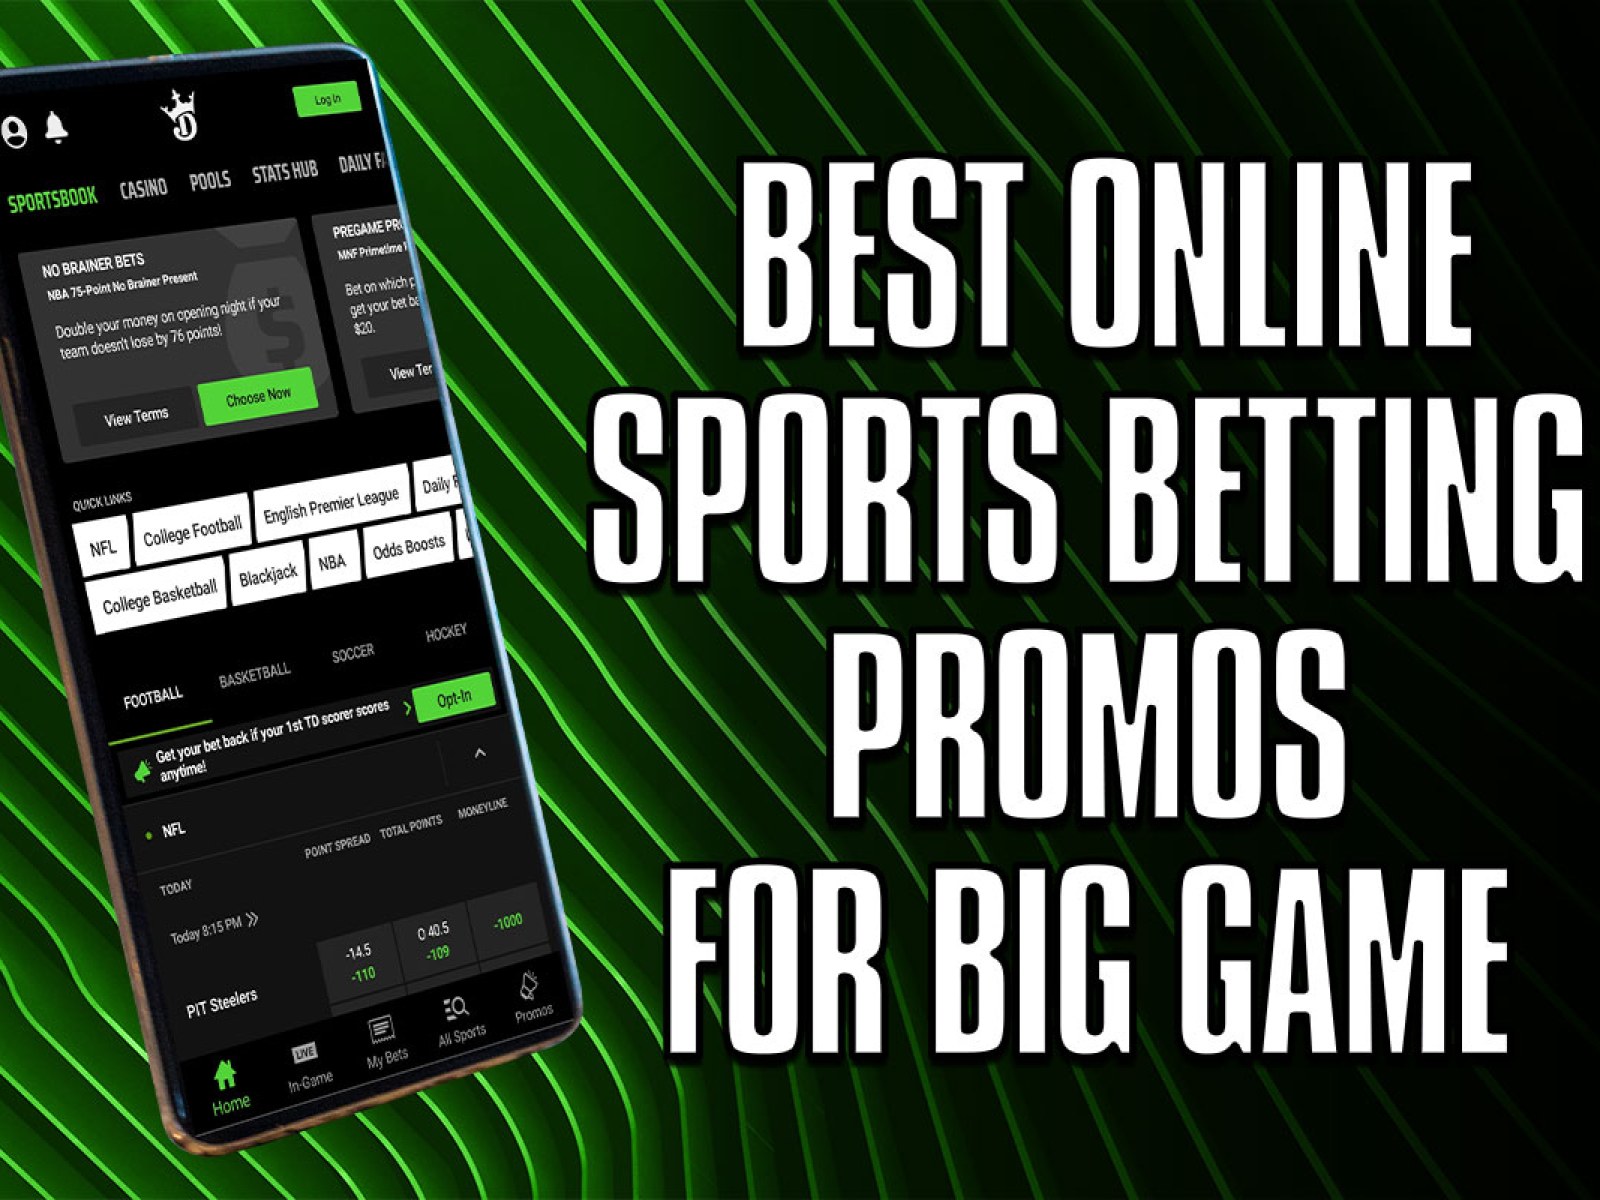 Best Betting Sites UK: Top Online Bookmakers & Bookies For UK Sports Betting